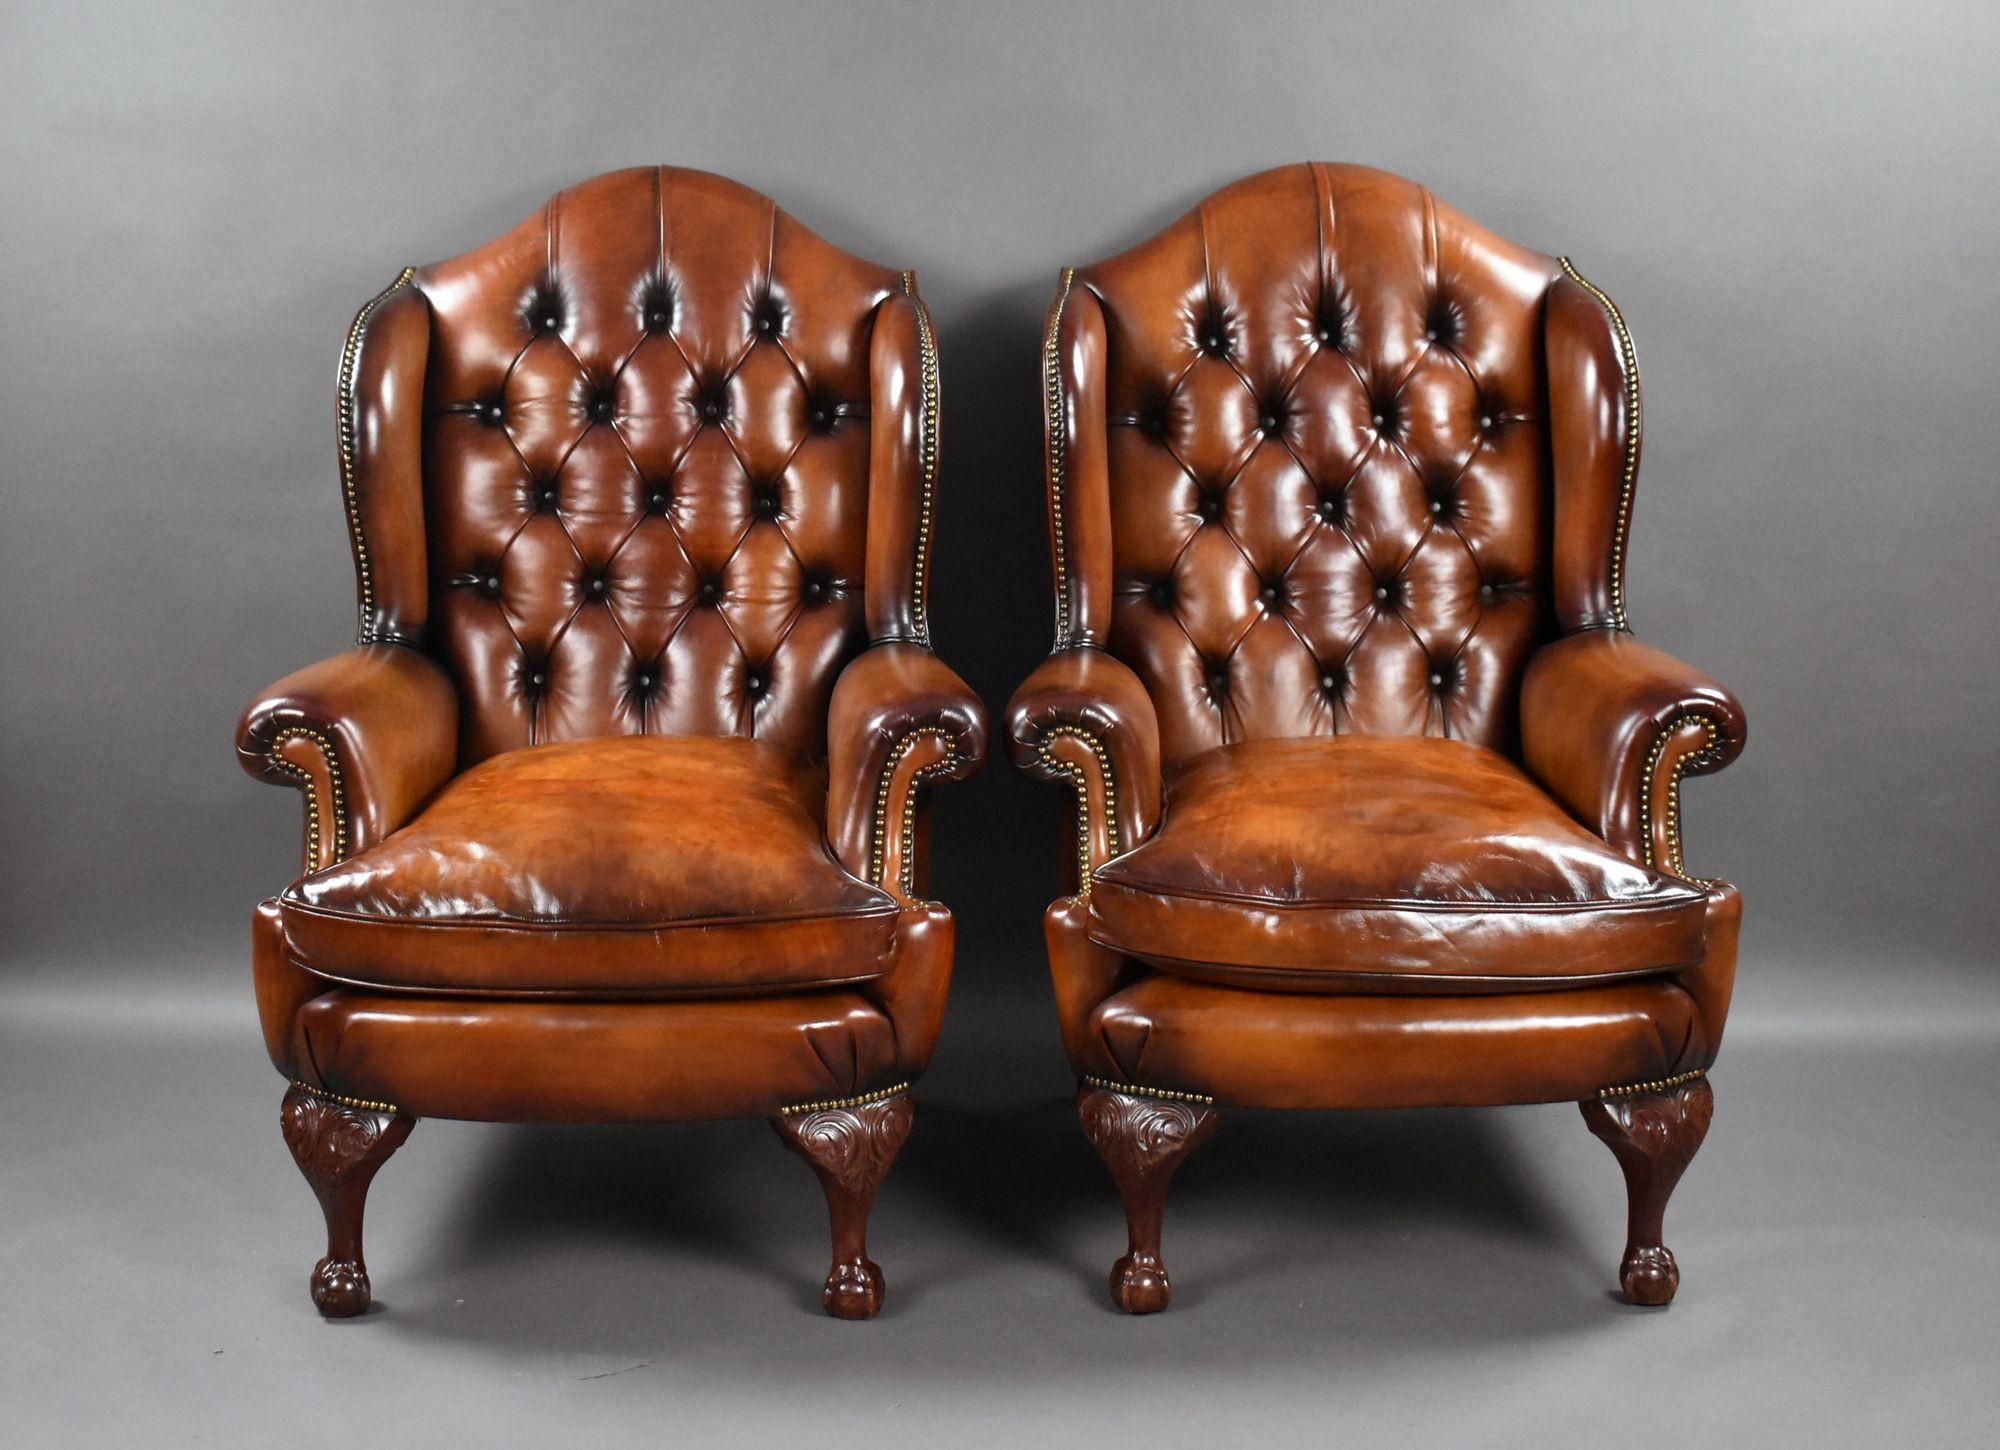 For sale is a very good quality pair of leather wing chairs, having shaped and deep buttoned backs, above a feather stuffed cushion, standing on elegant carved claw and ball feet, each chair is in excellent condition and has been hand coloured to a